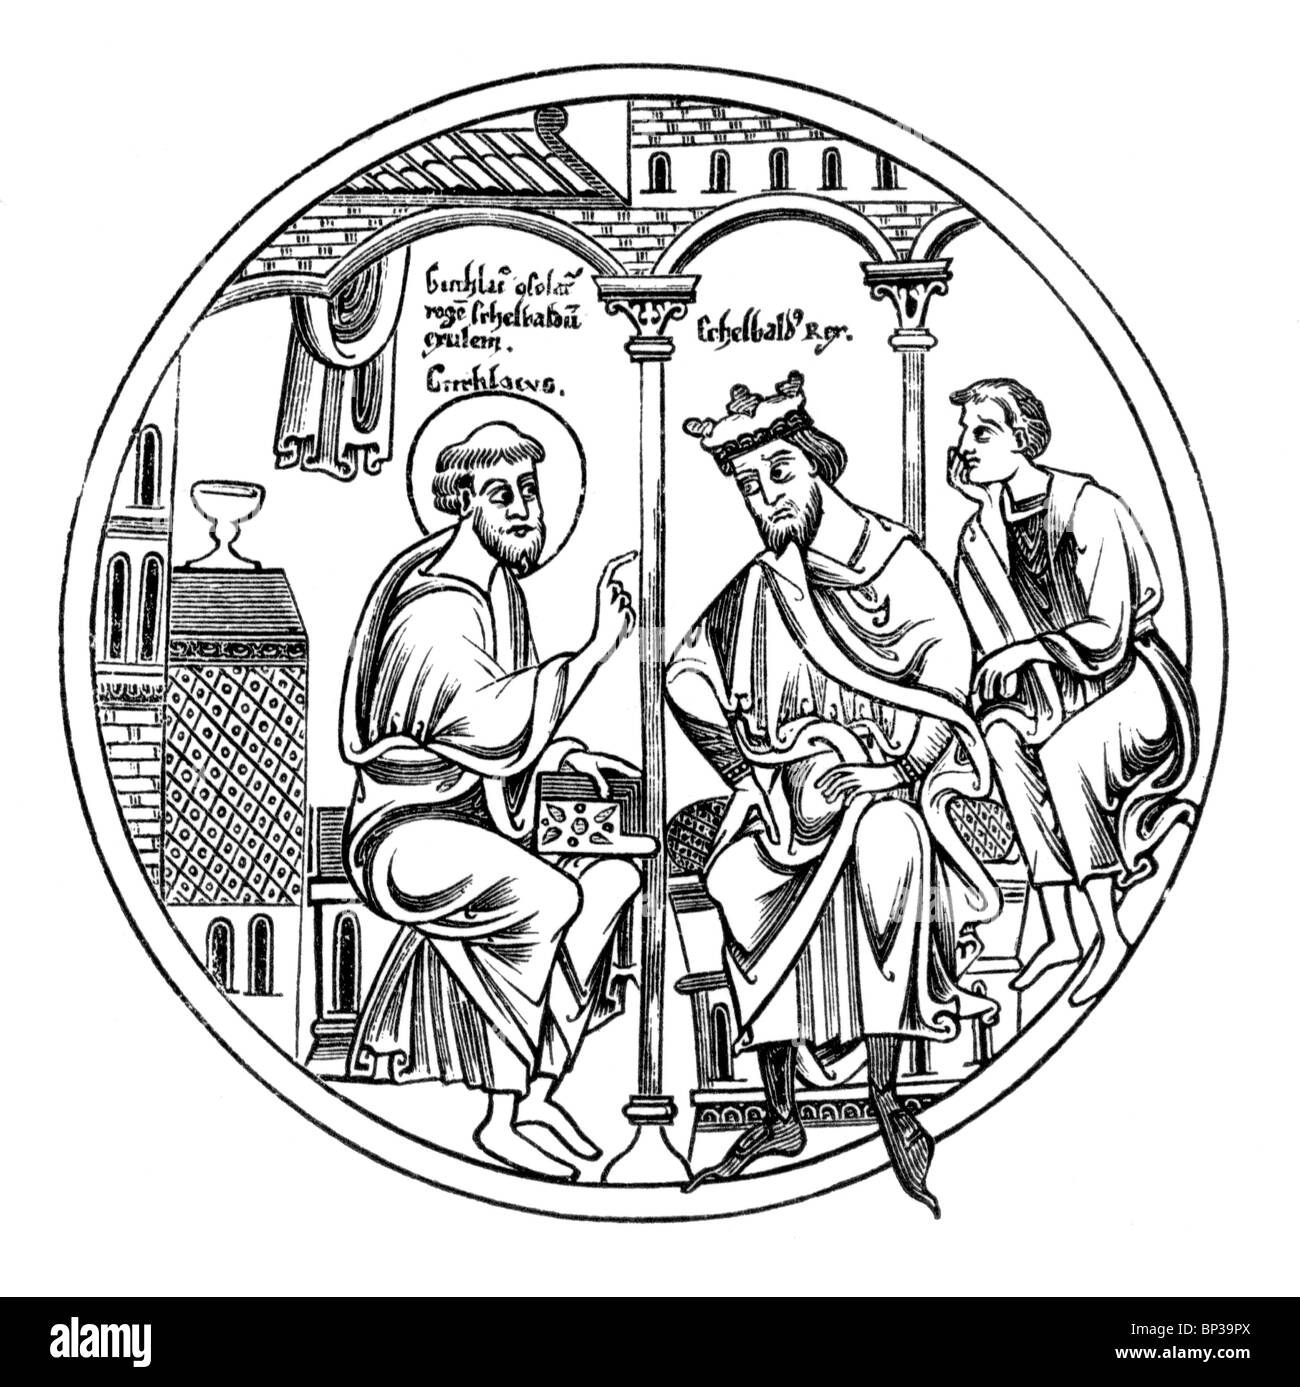 Black and White Illustration; Scene from the Guthlac Roll; 12th century; The Life of Guthlac; King Aethelbald visiting Guthlac Stock Photo